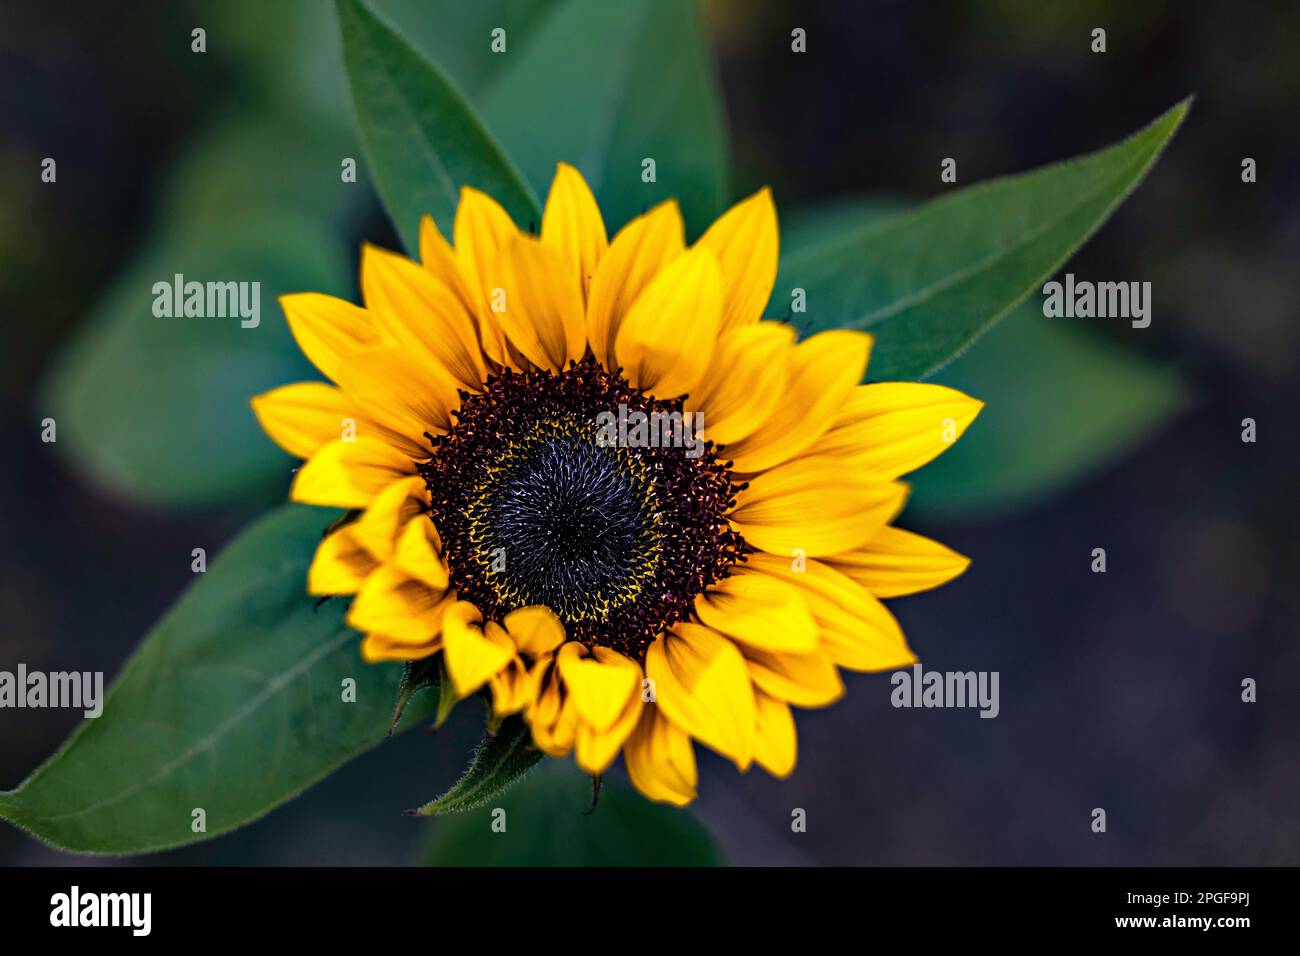 Close up of bright yellow sunflower with blurred background Stock Photo